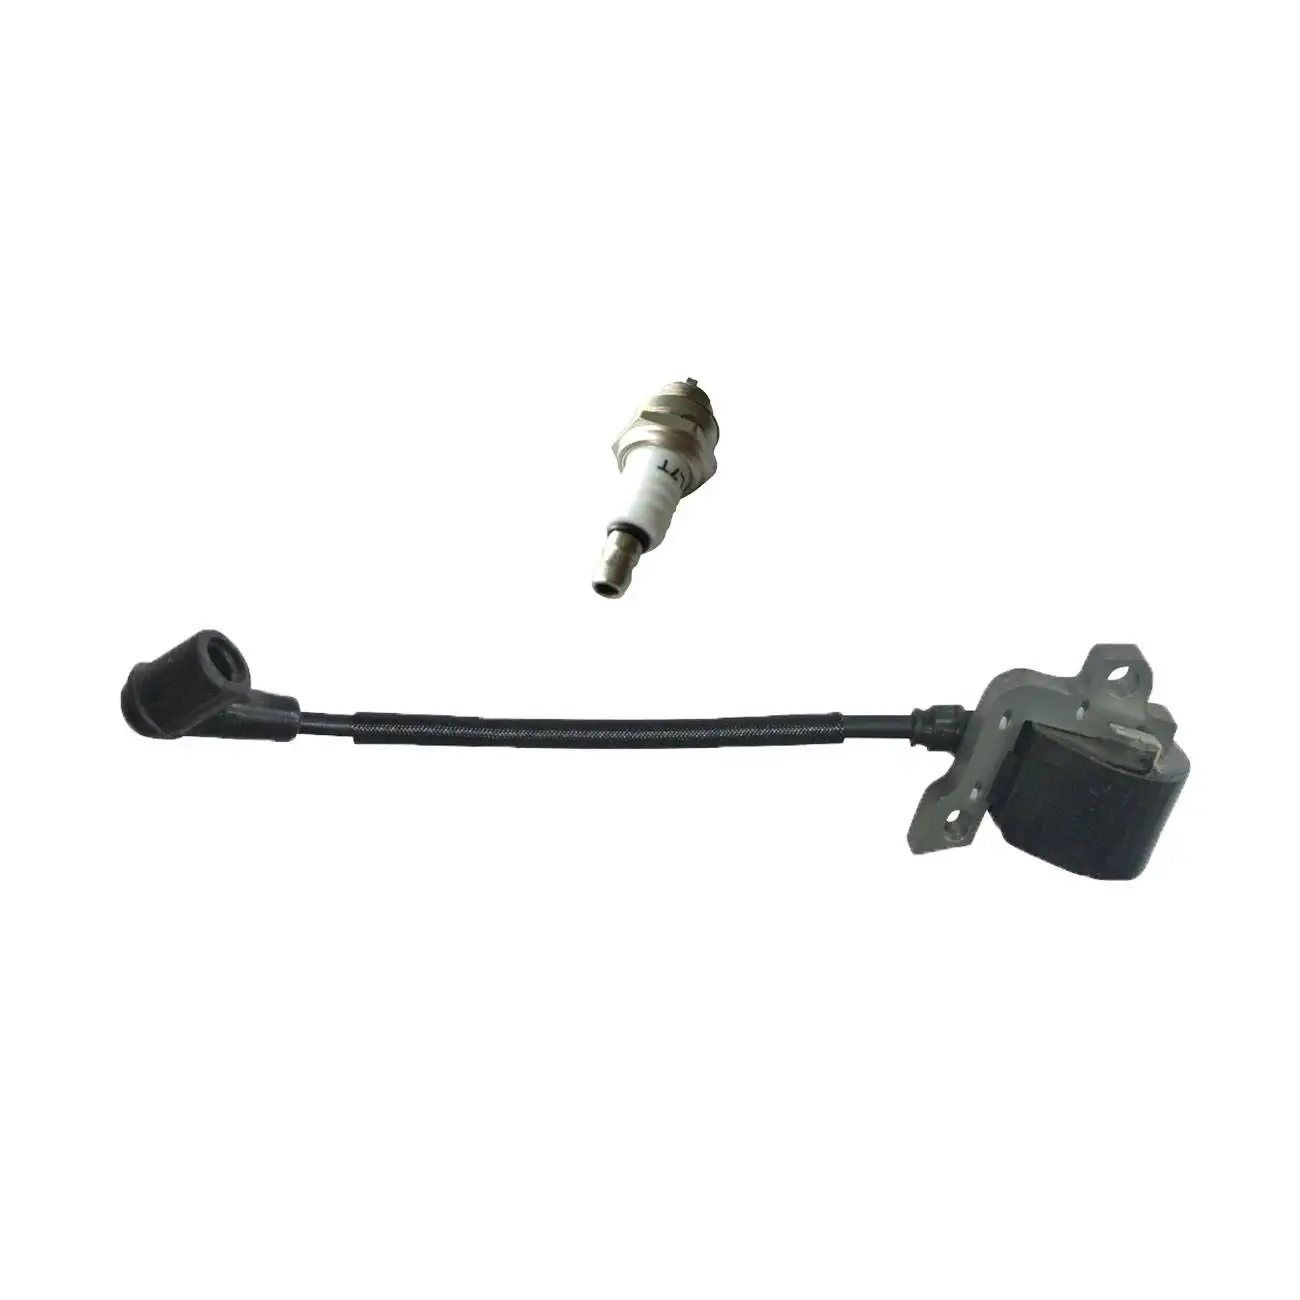 Spreak Plug& Ignition Coil Fit STIHL  024 026 028 029 MS381 MS380 MS260 Chainsaw Replace NEW Parts